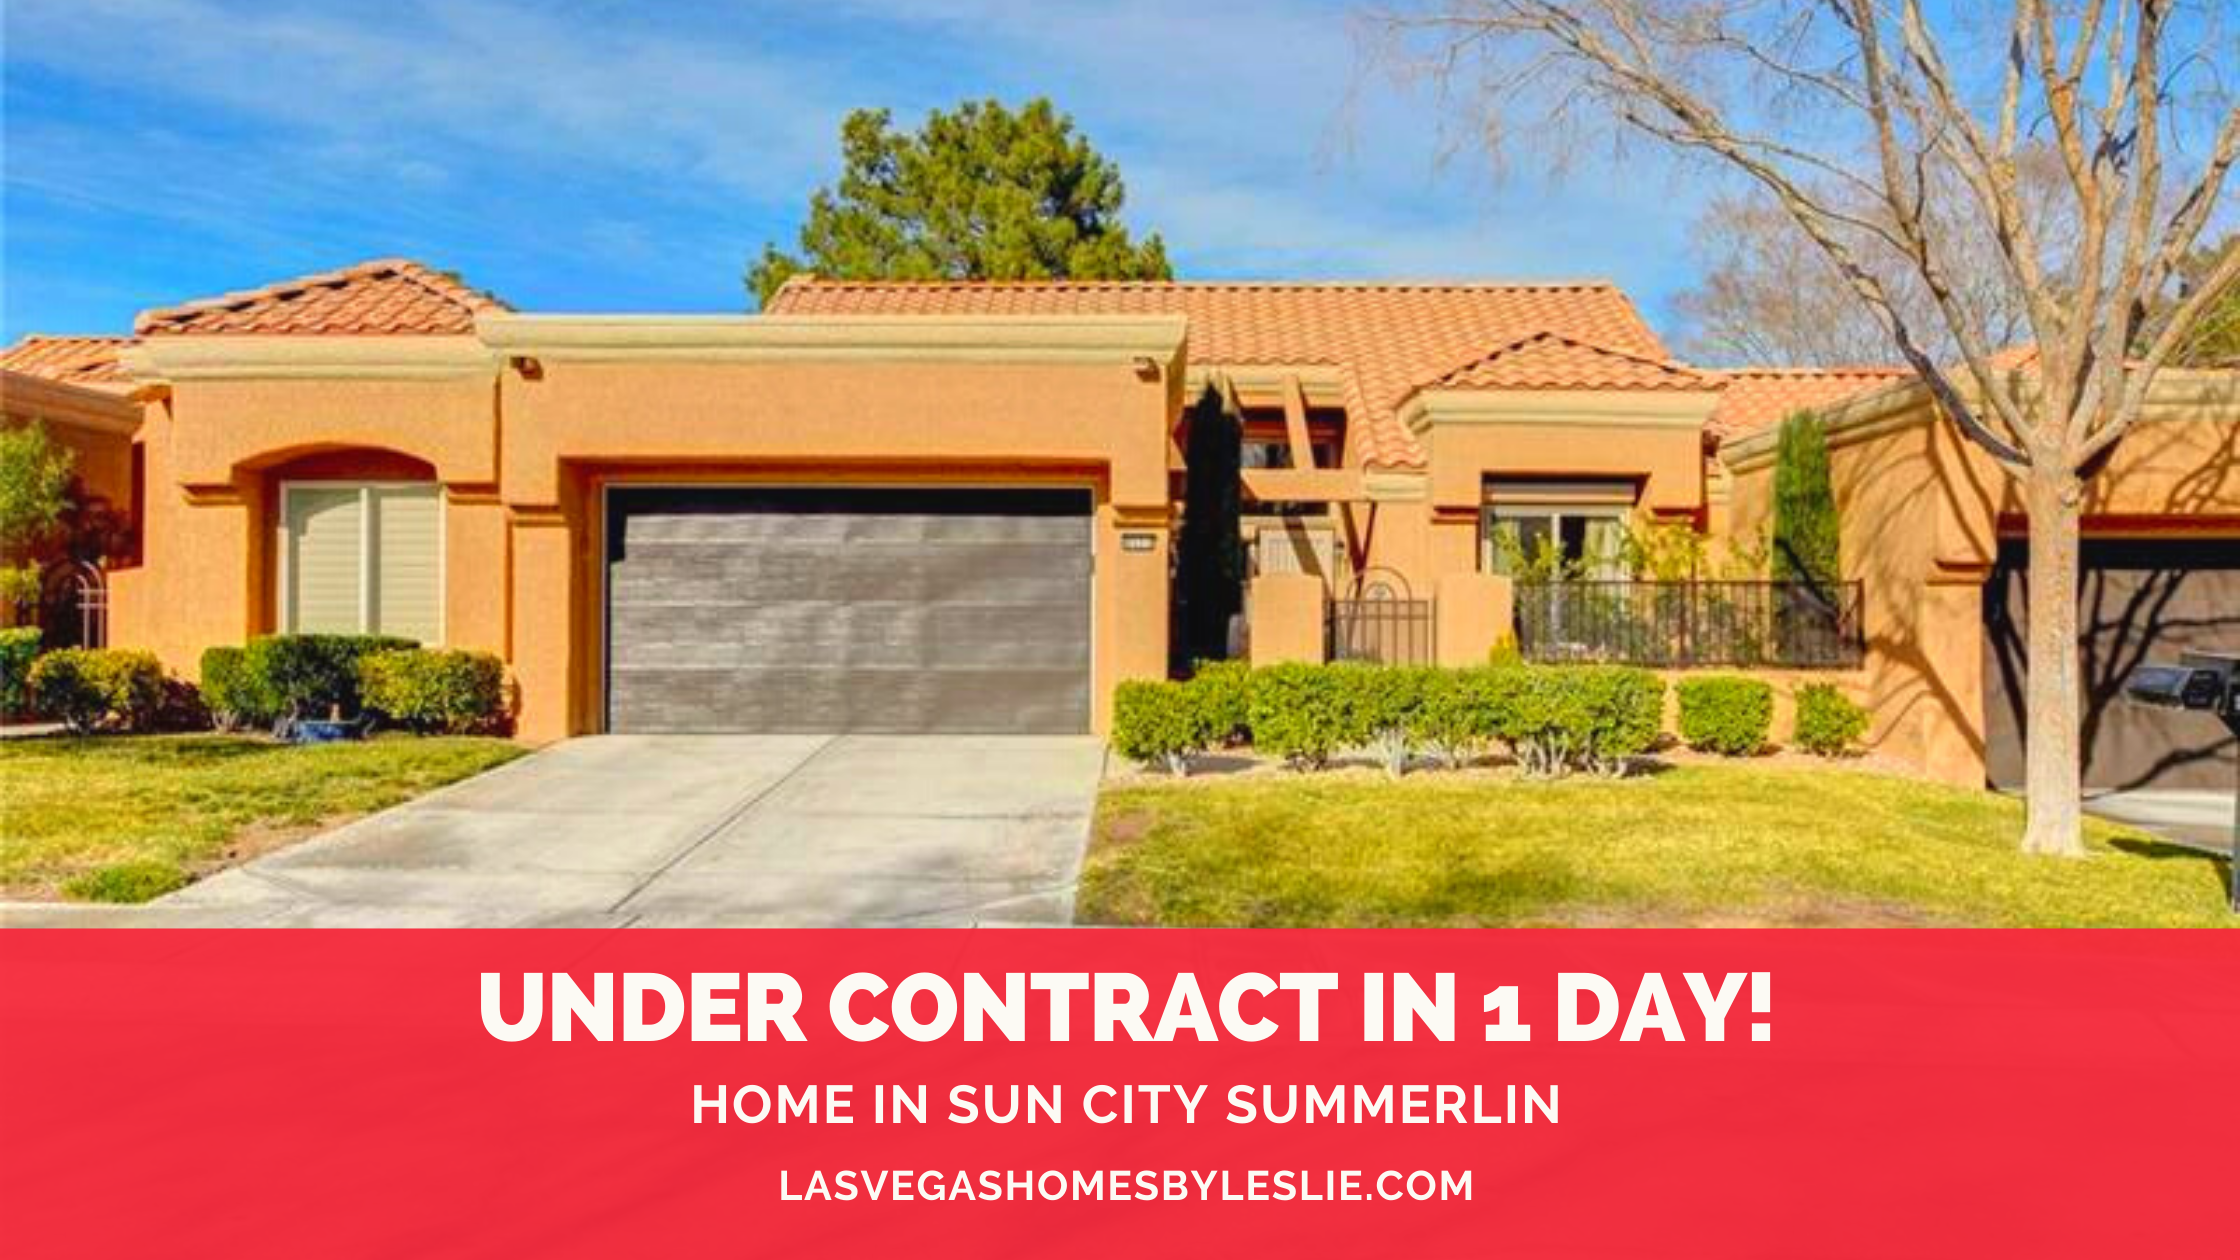 Home in Sun City Summerlin sells in 1 day